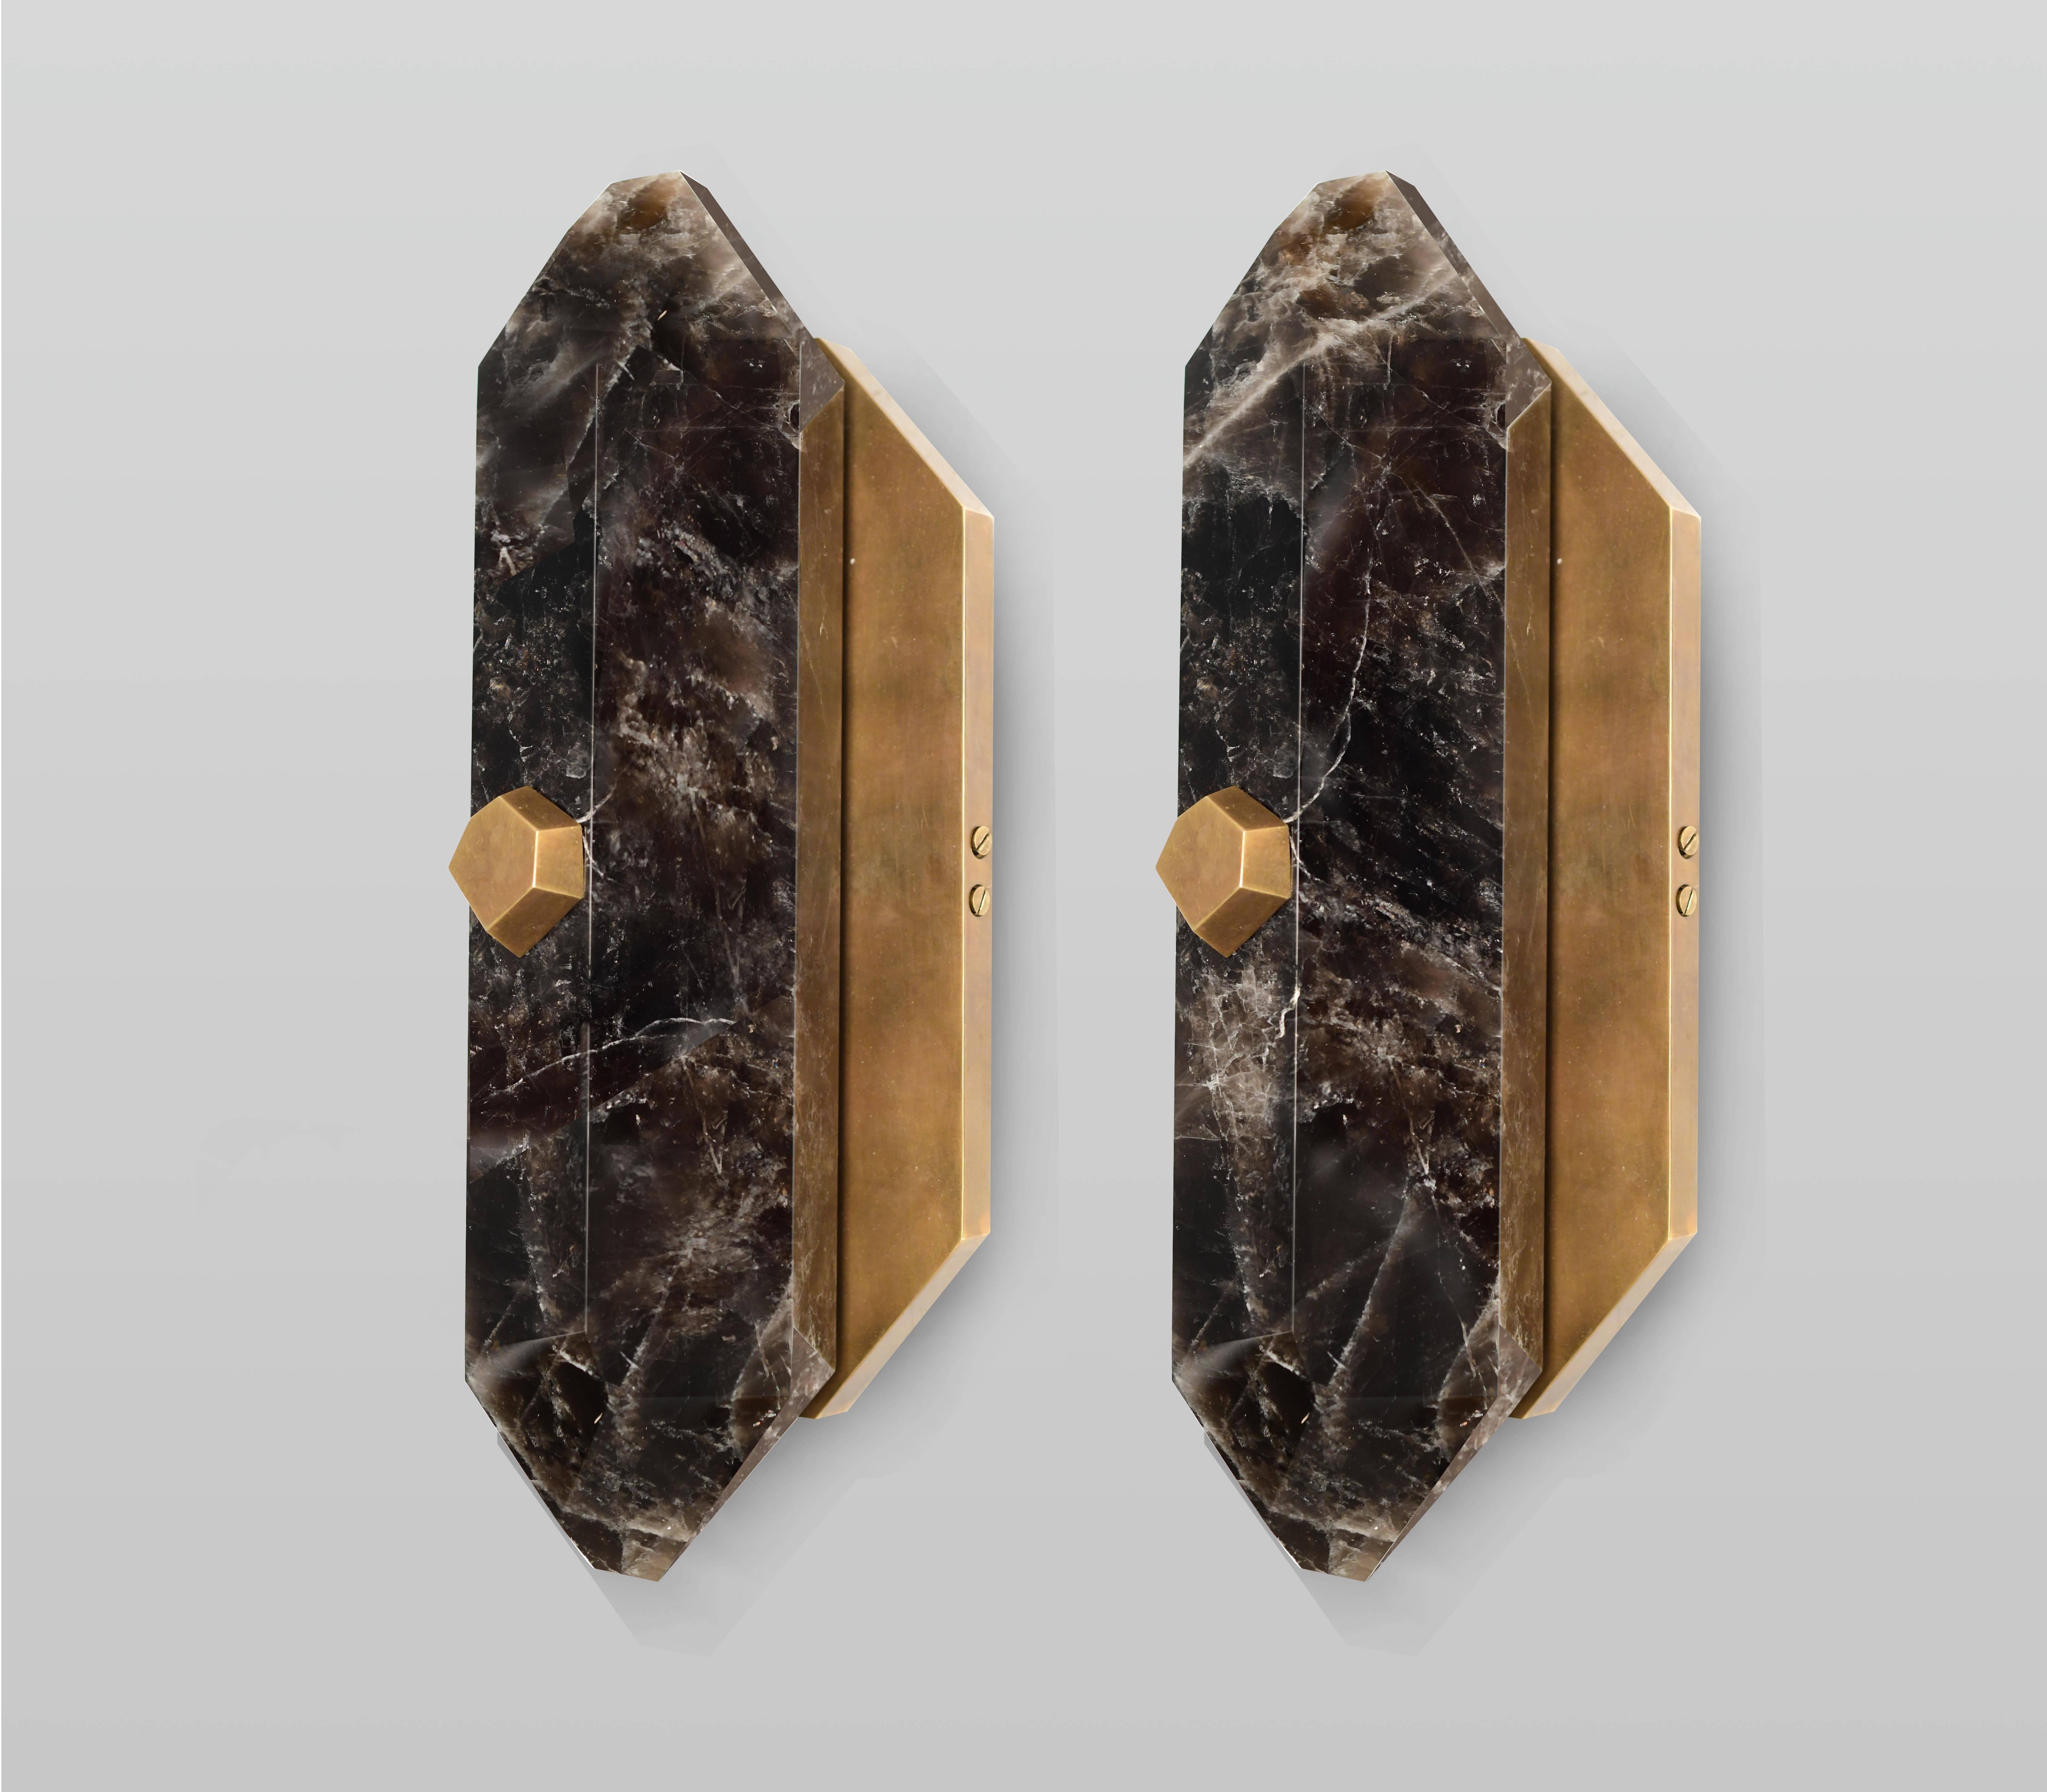 A fine carved diamond form dark rock crystal quartz wall sconces with the antique brass finish mount. created by Phoenix Gallery.
Custom measurement and finish available.
Each sconce installed two sockets, each socket use 60 watts LED light bulb and